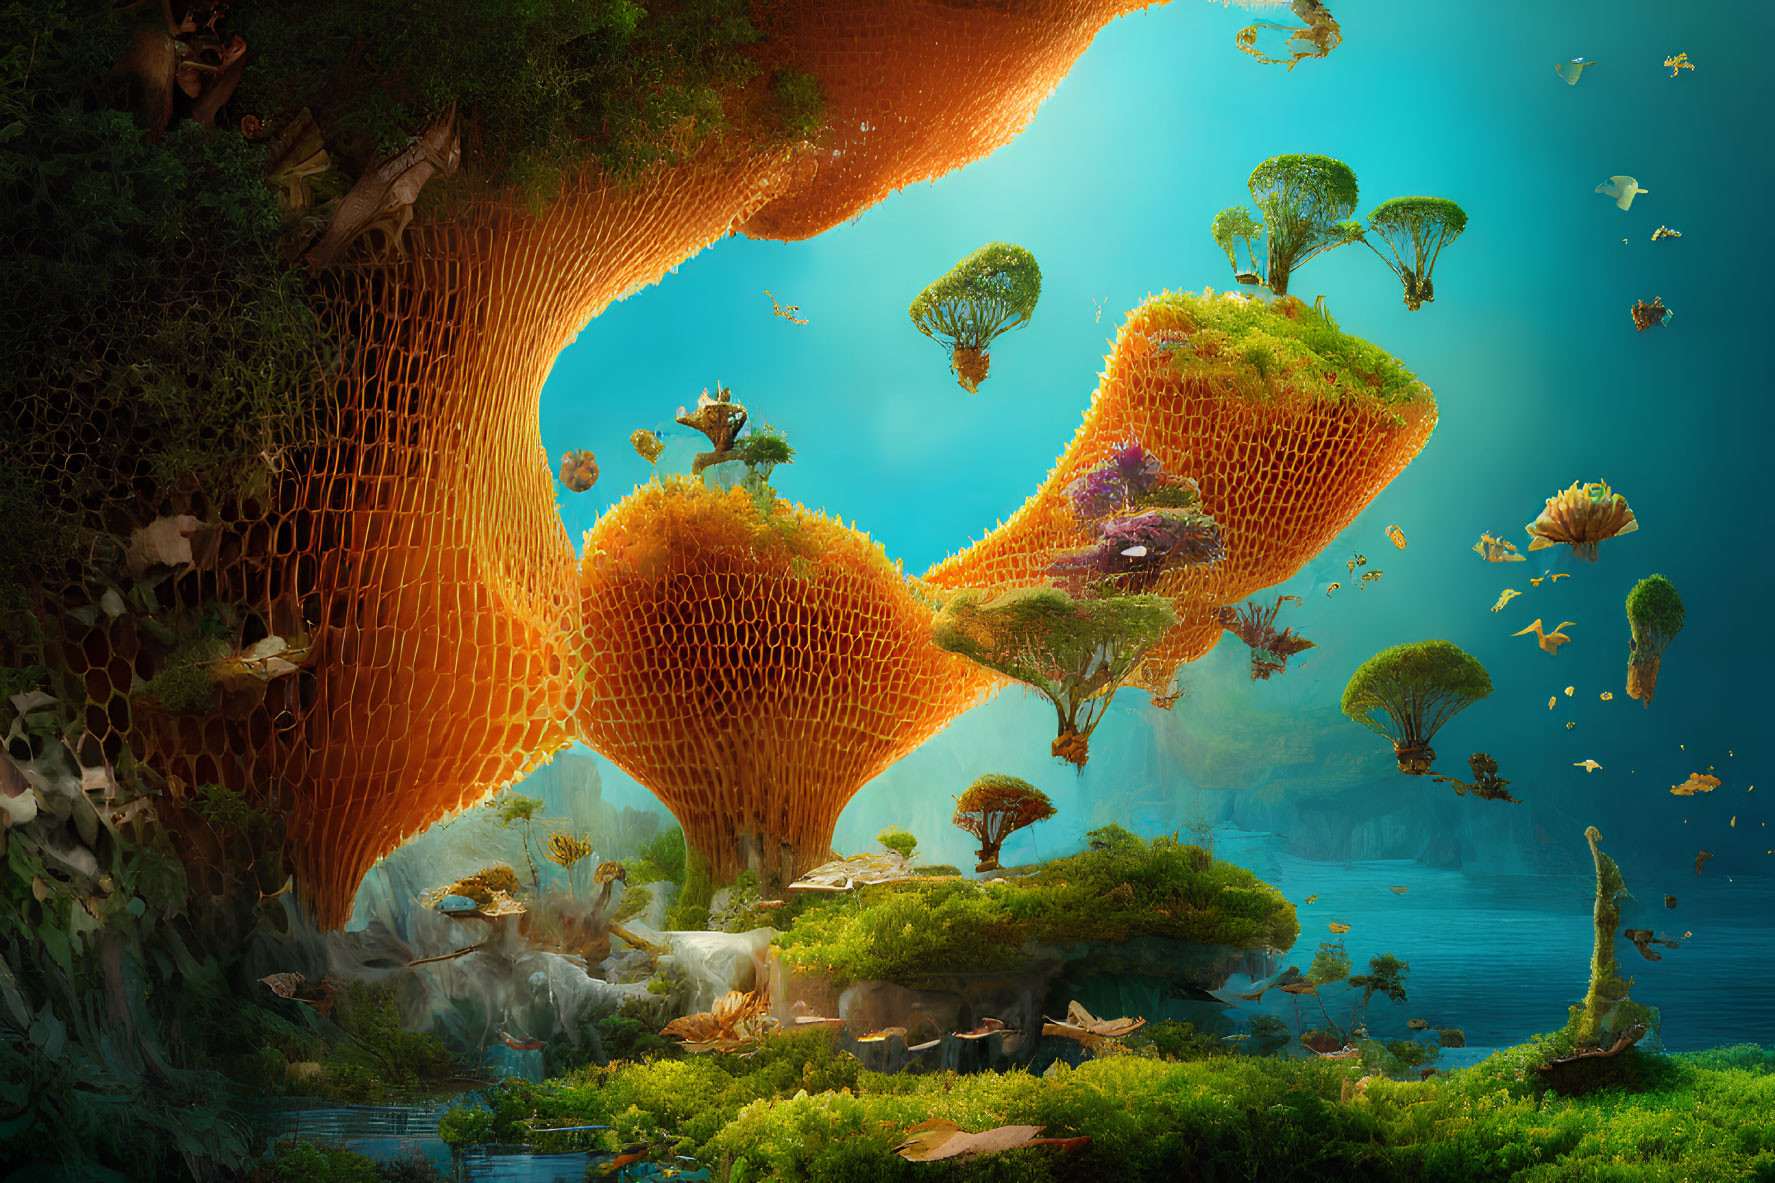 Underwater fantasy scene with honeycomb structures and floating islands